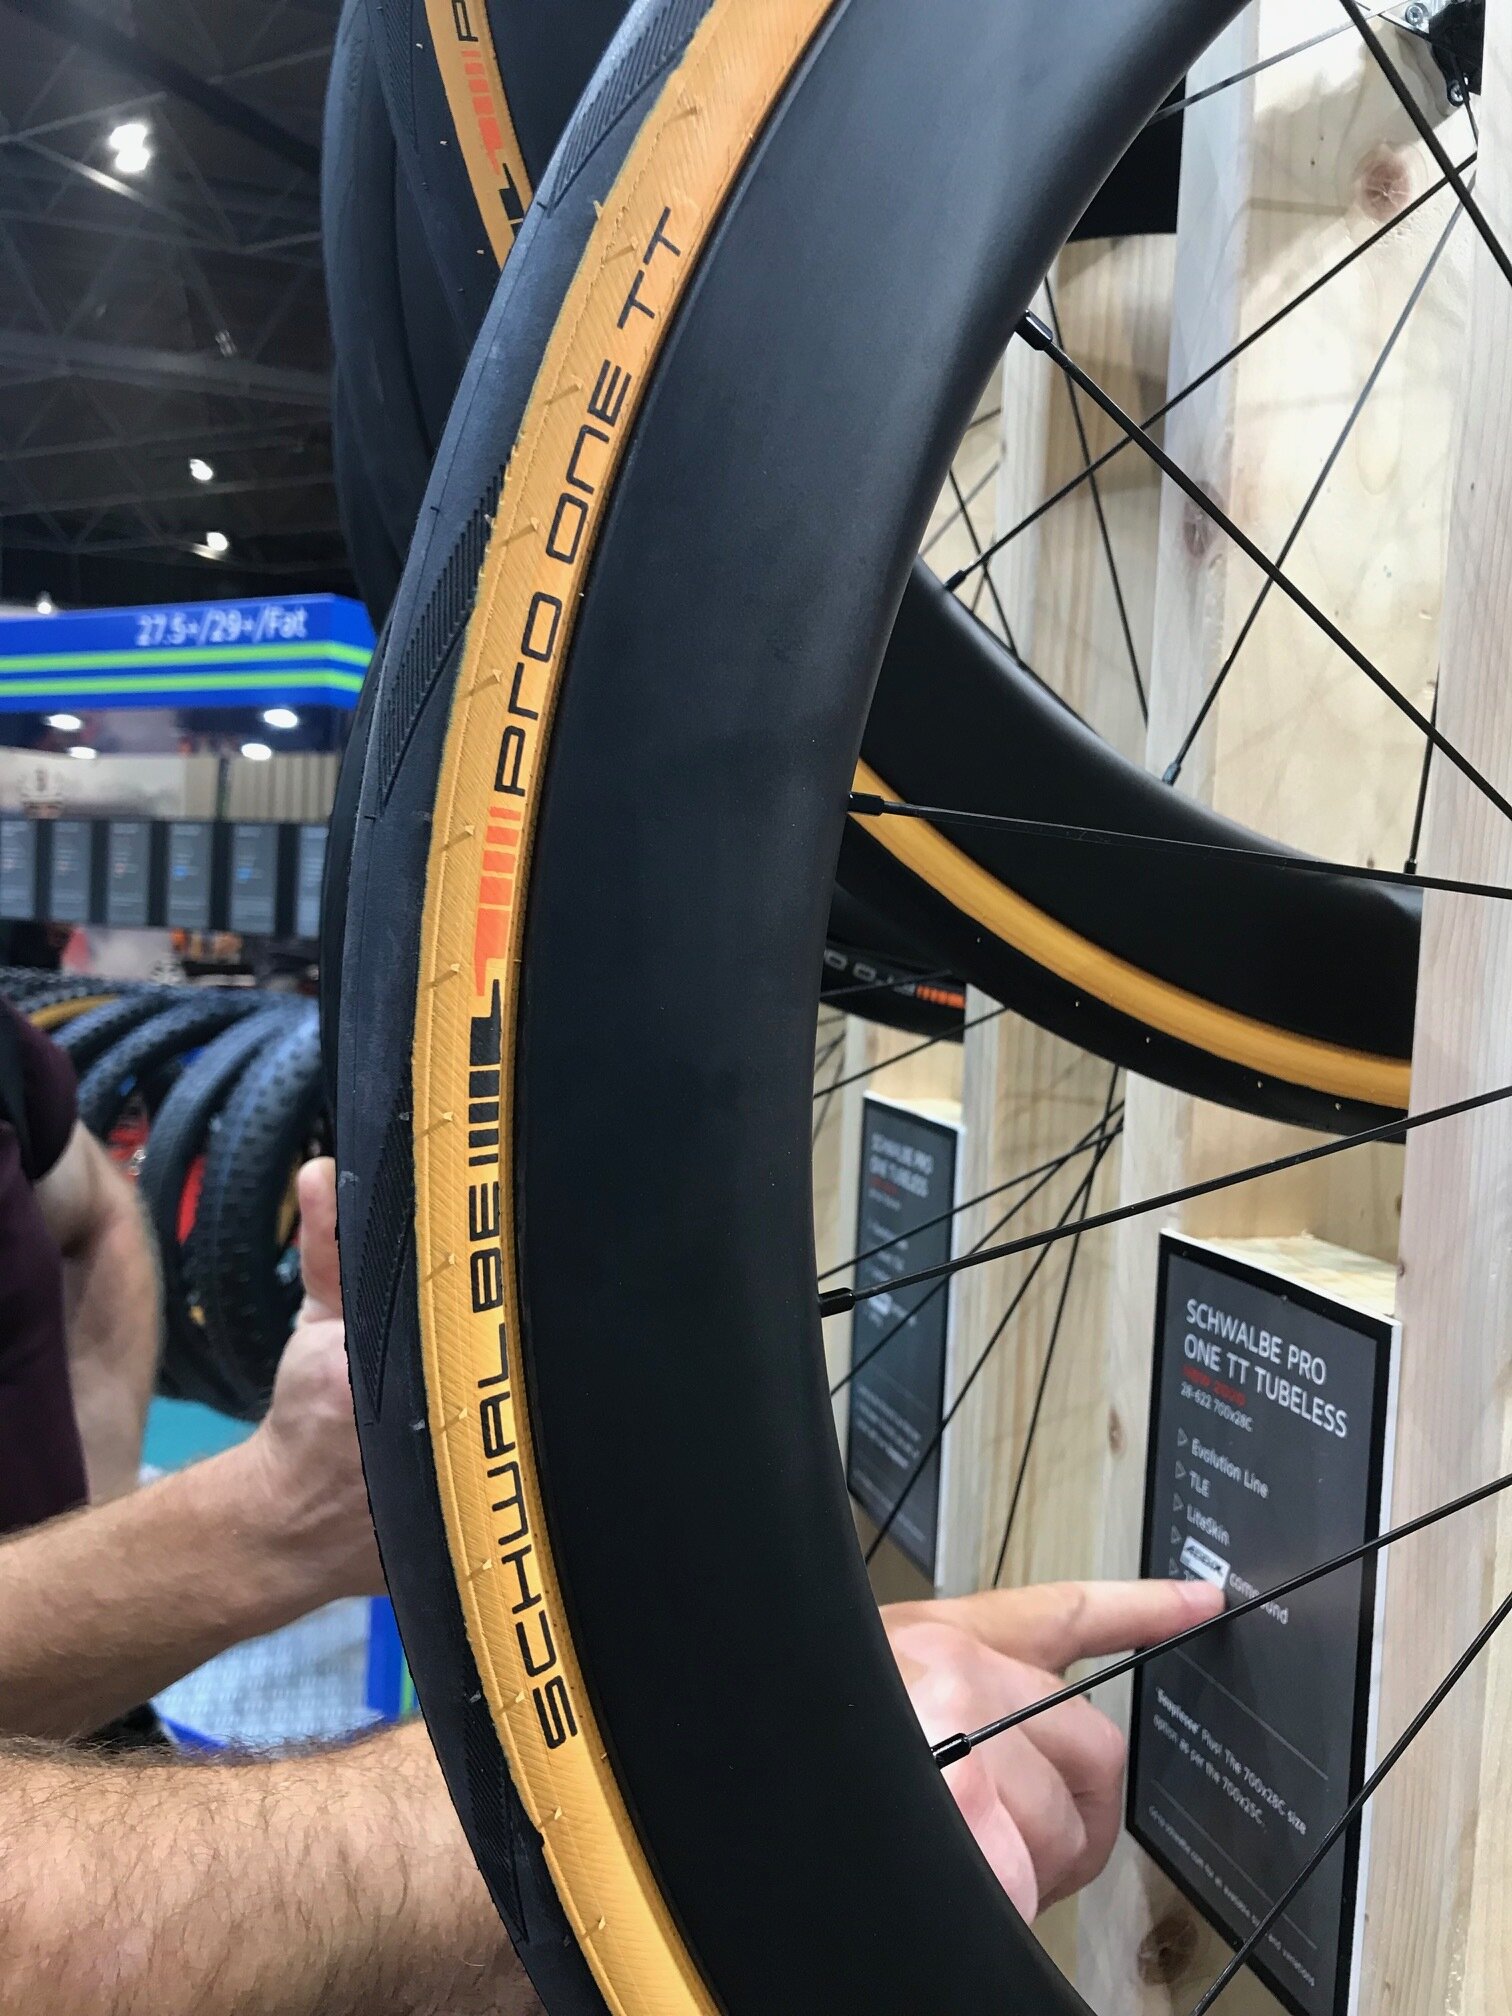 schwalbe tubeless road tires